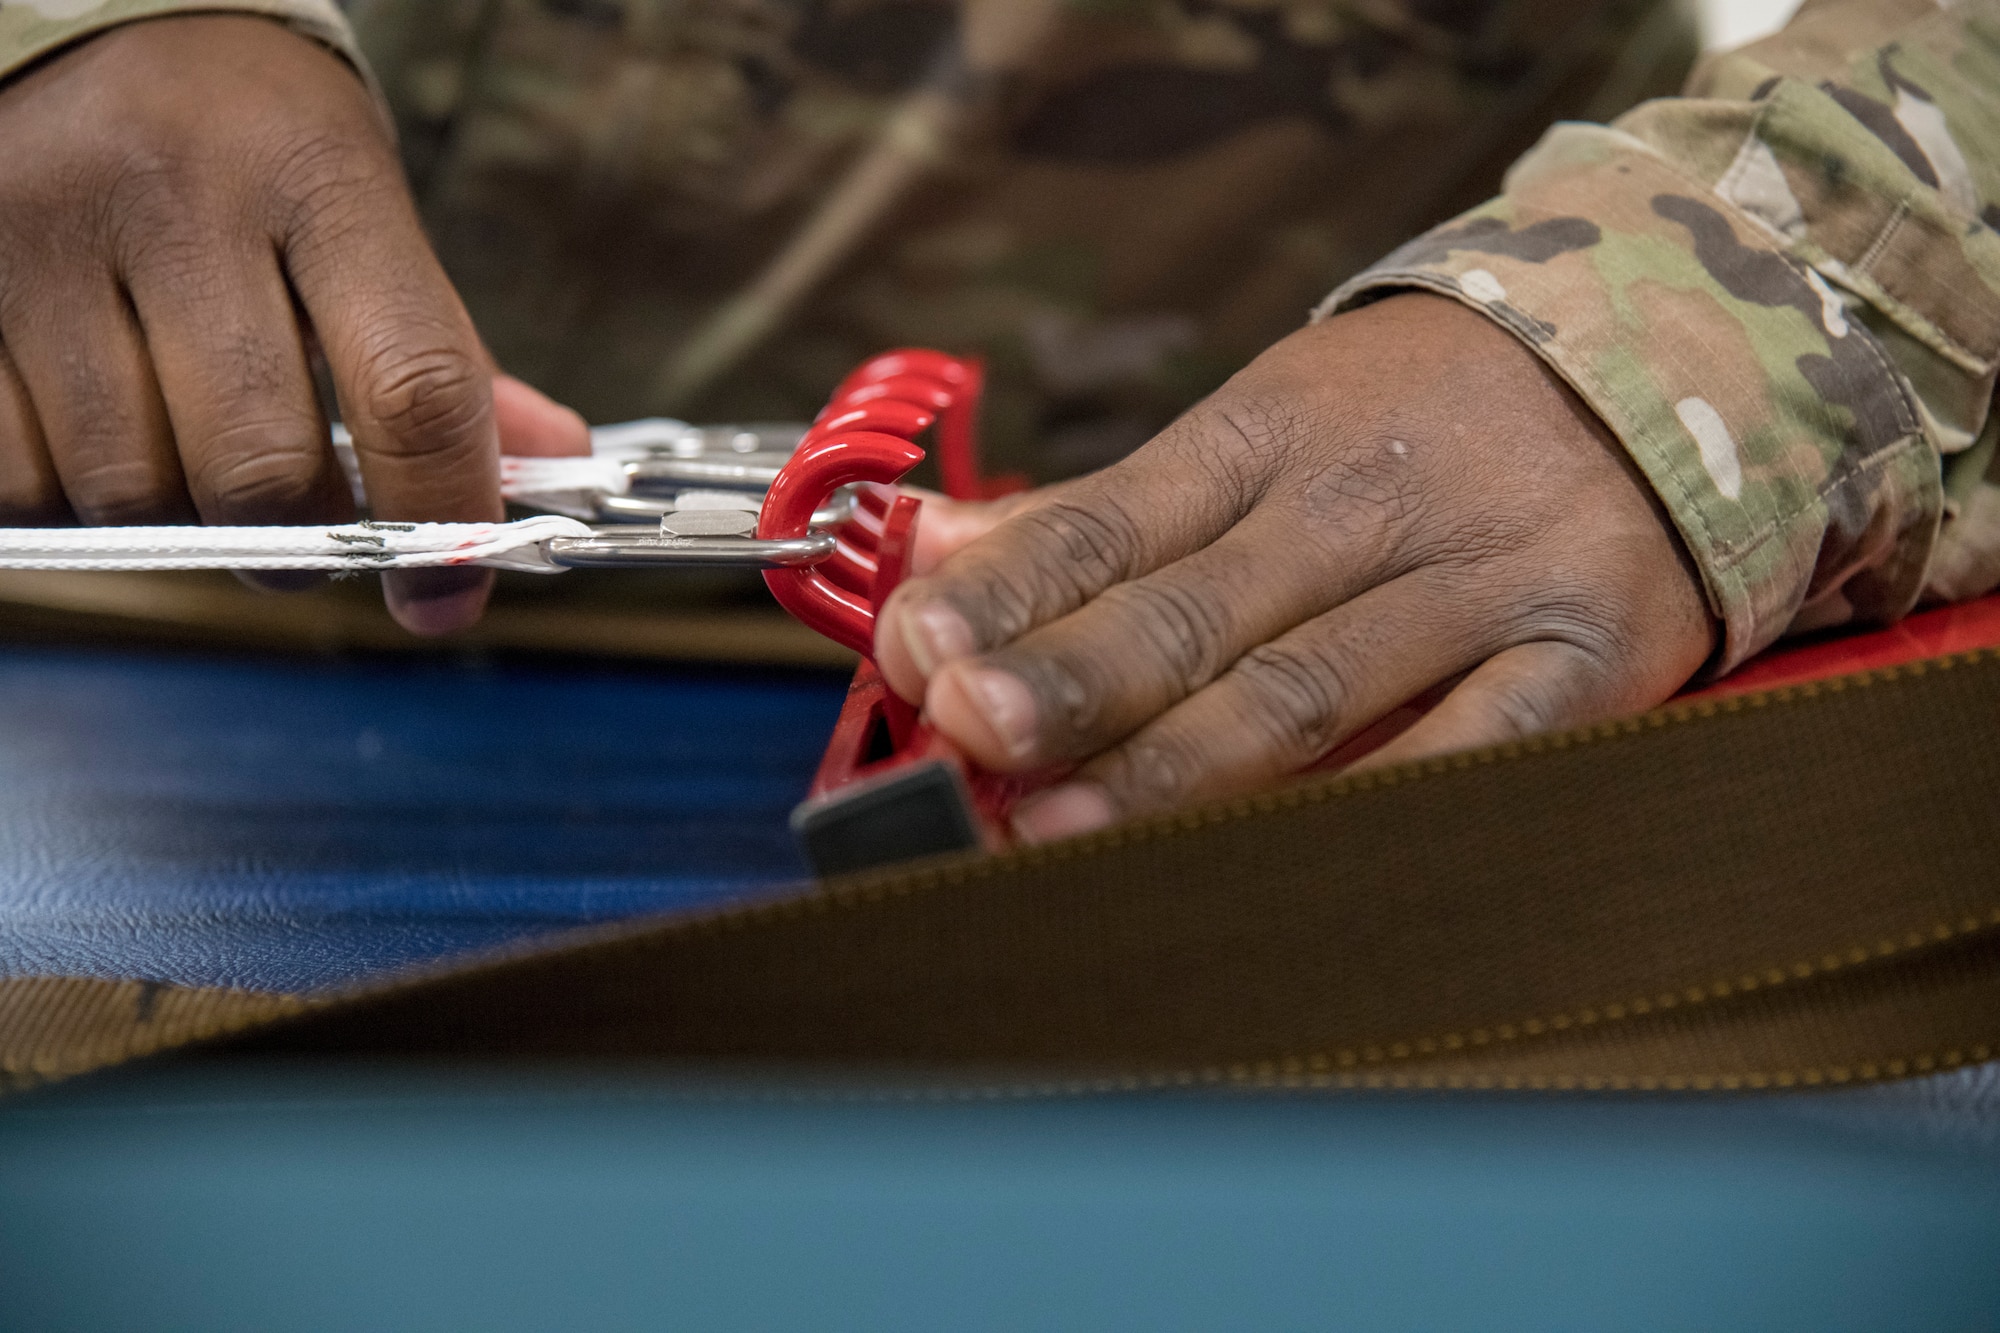 Tech. Sgt. Tyree Leverette, 403rd Operational Support Squadron aircrew flight equipment technician at Keesler Air Force Base, Miss., fastens the cords of a  BA-30 Low Profile Parachute system to an apparatus that facilitates the assembly and packing of the parachute into its backpack May 2, 2021. Gradually, the Air Force is making a branch-wide transition to the BA-30s for certain aircraft. (U.S. Air Force by Staff Sgt. Kristen Pittman)